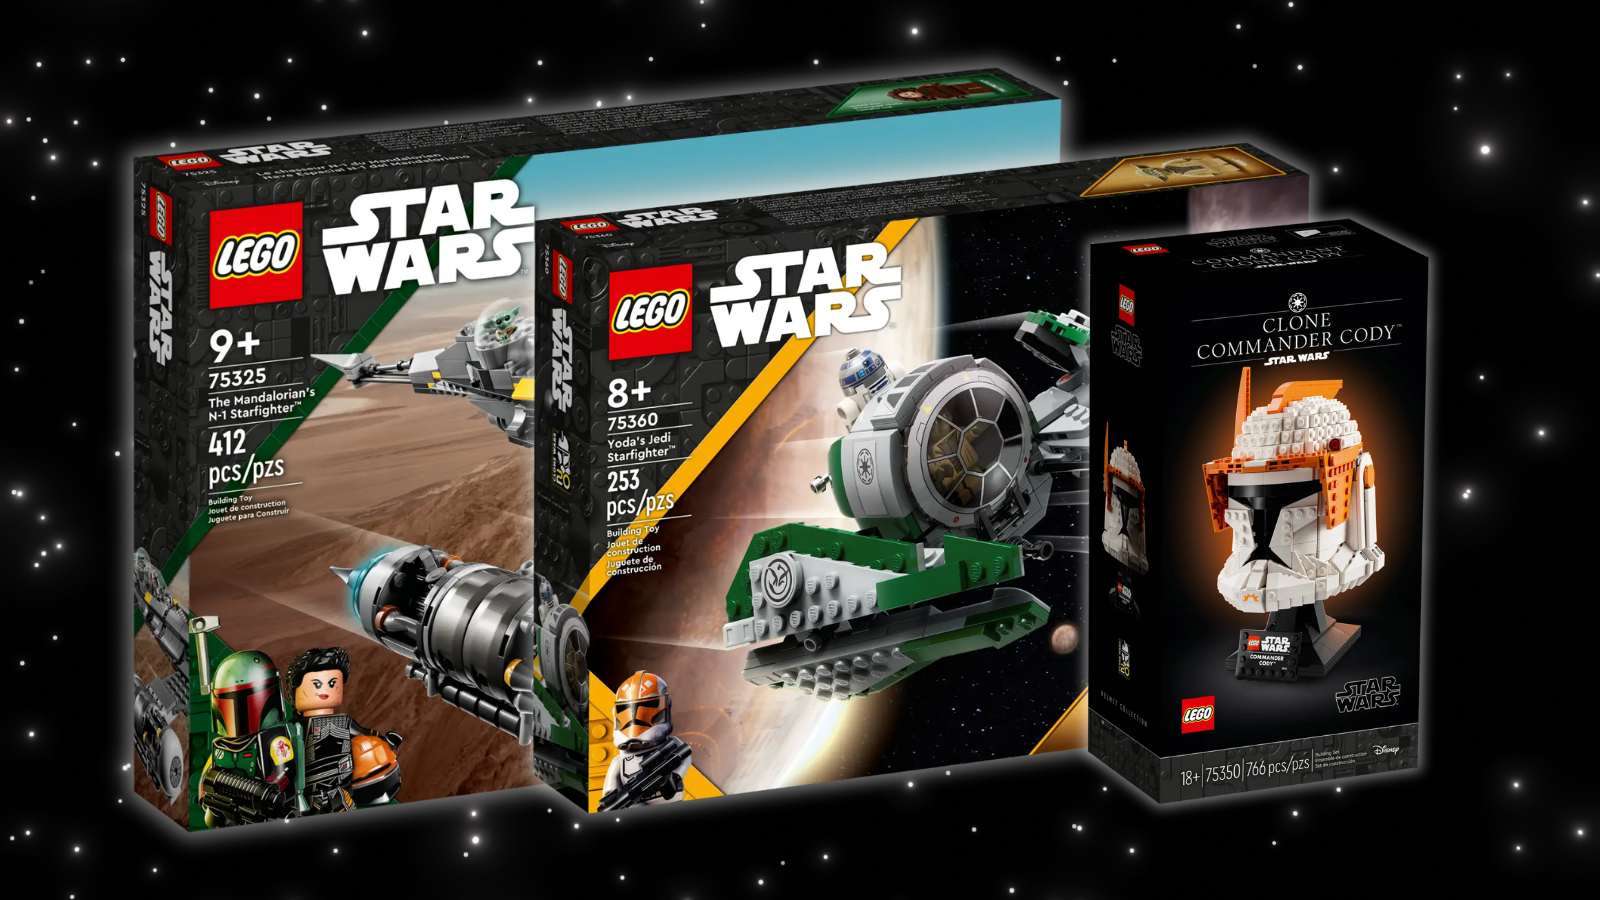 Three of the LEGO Star Wars sets discounted at Best Buy